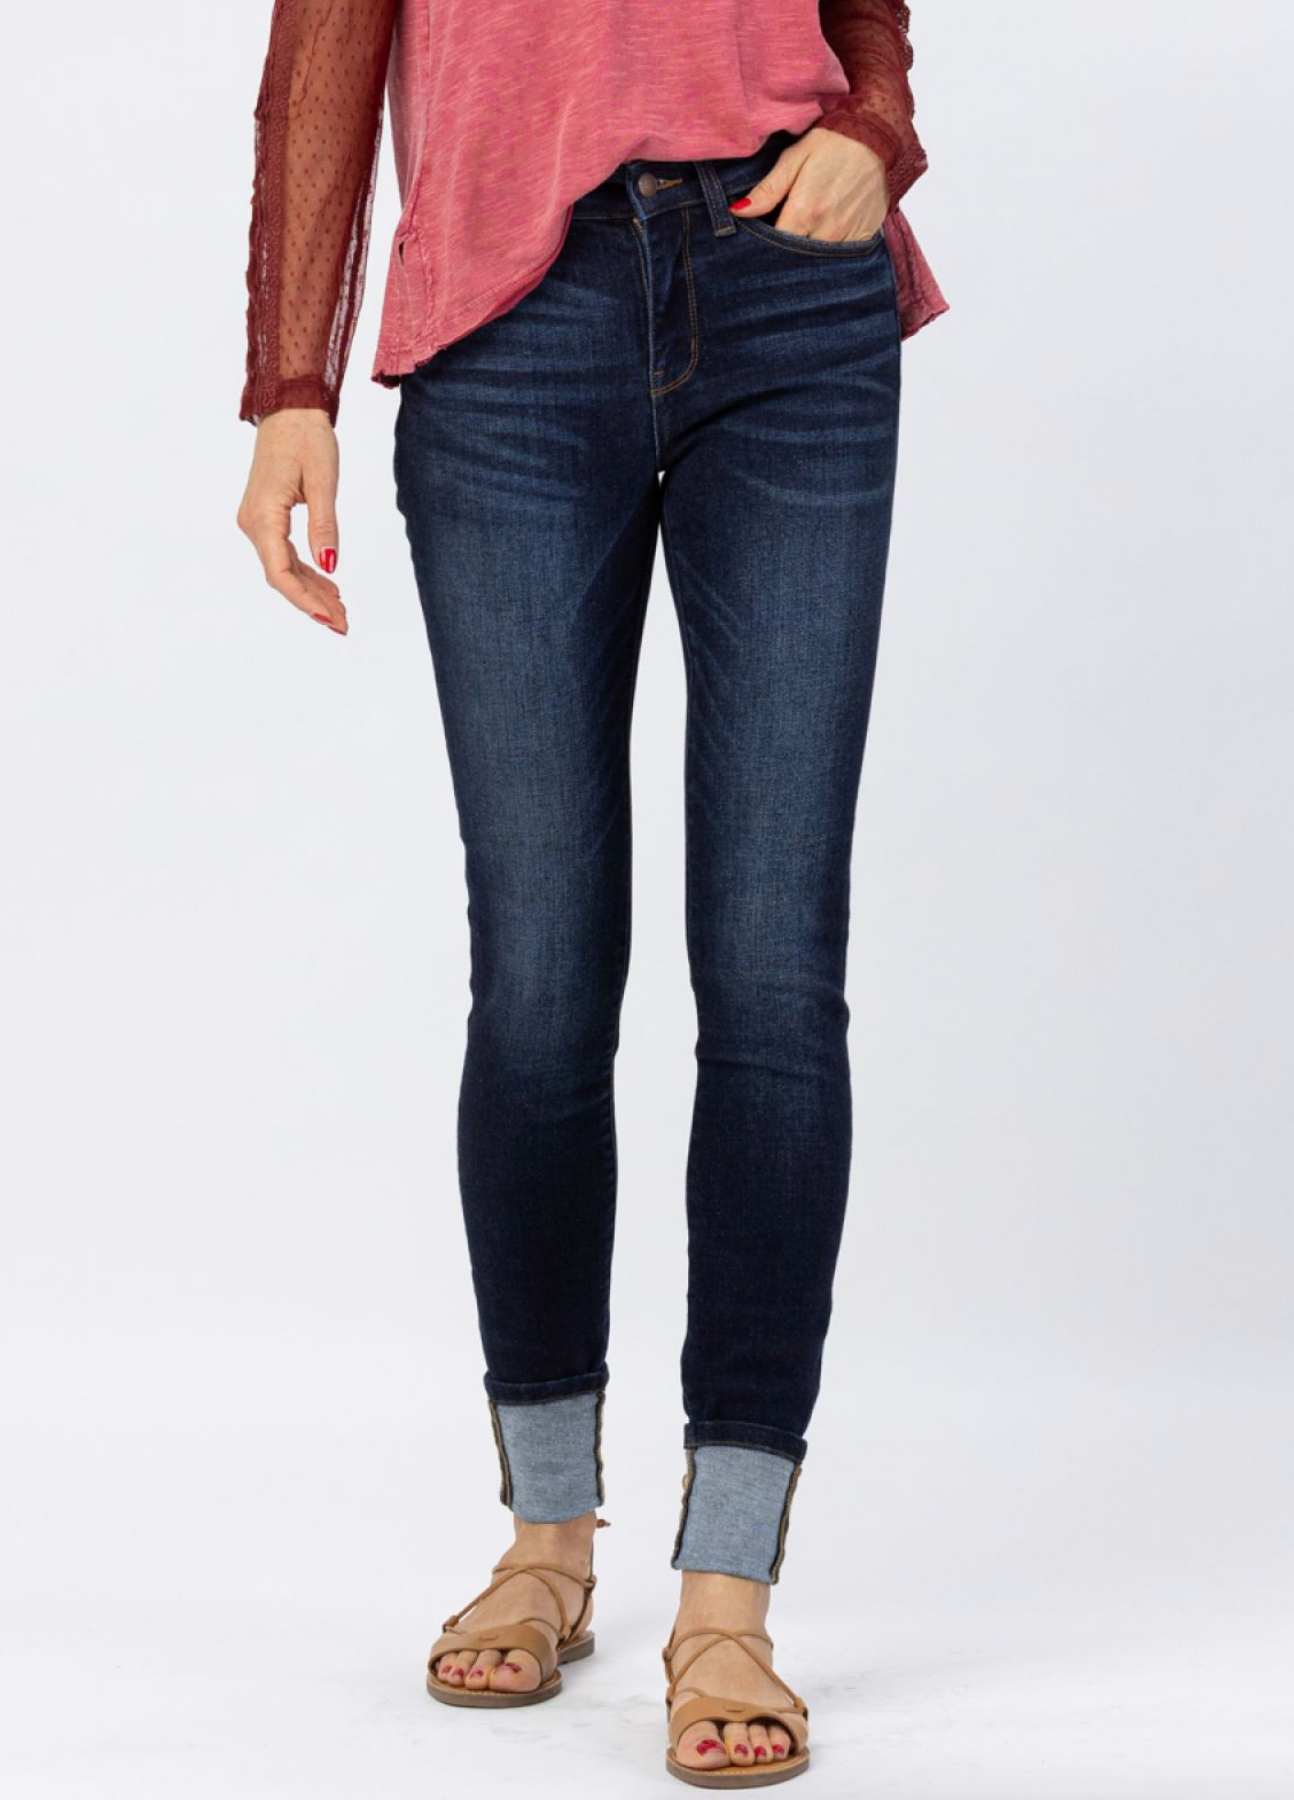 Tall Jeans, Jeans For Tall Women, Long Tall Sally